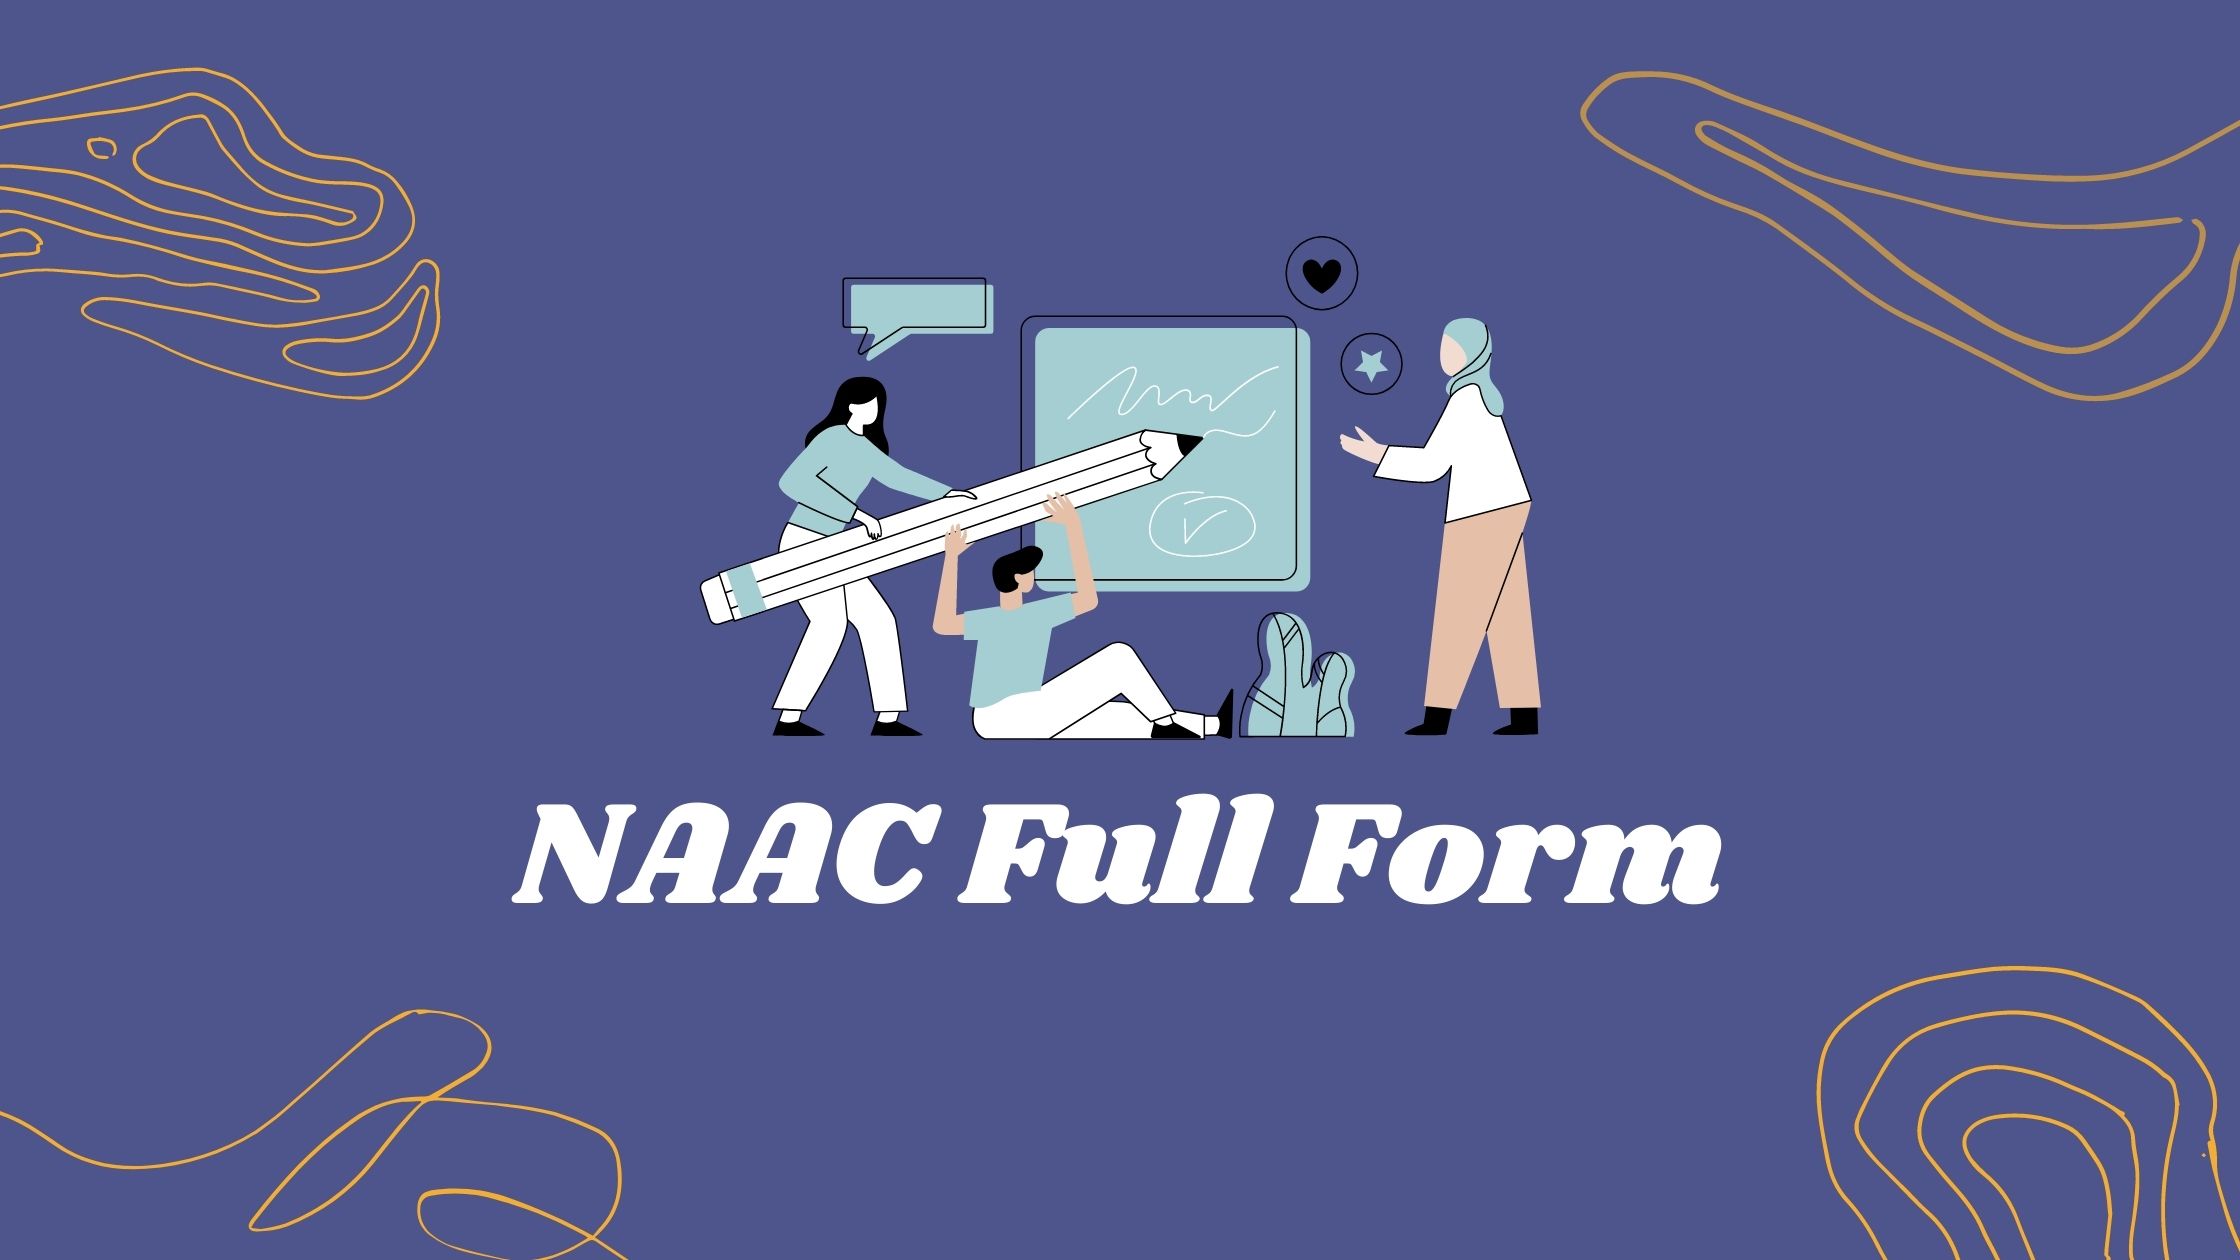 NAAC Full Form